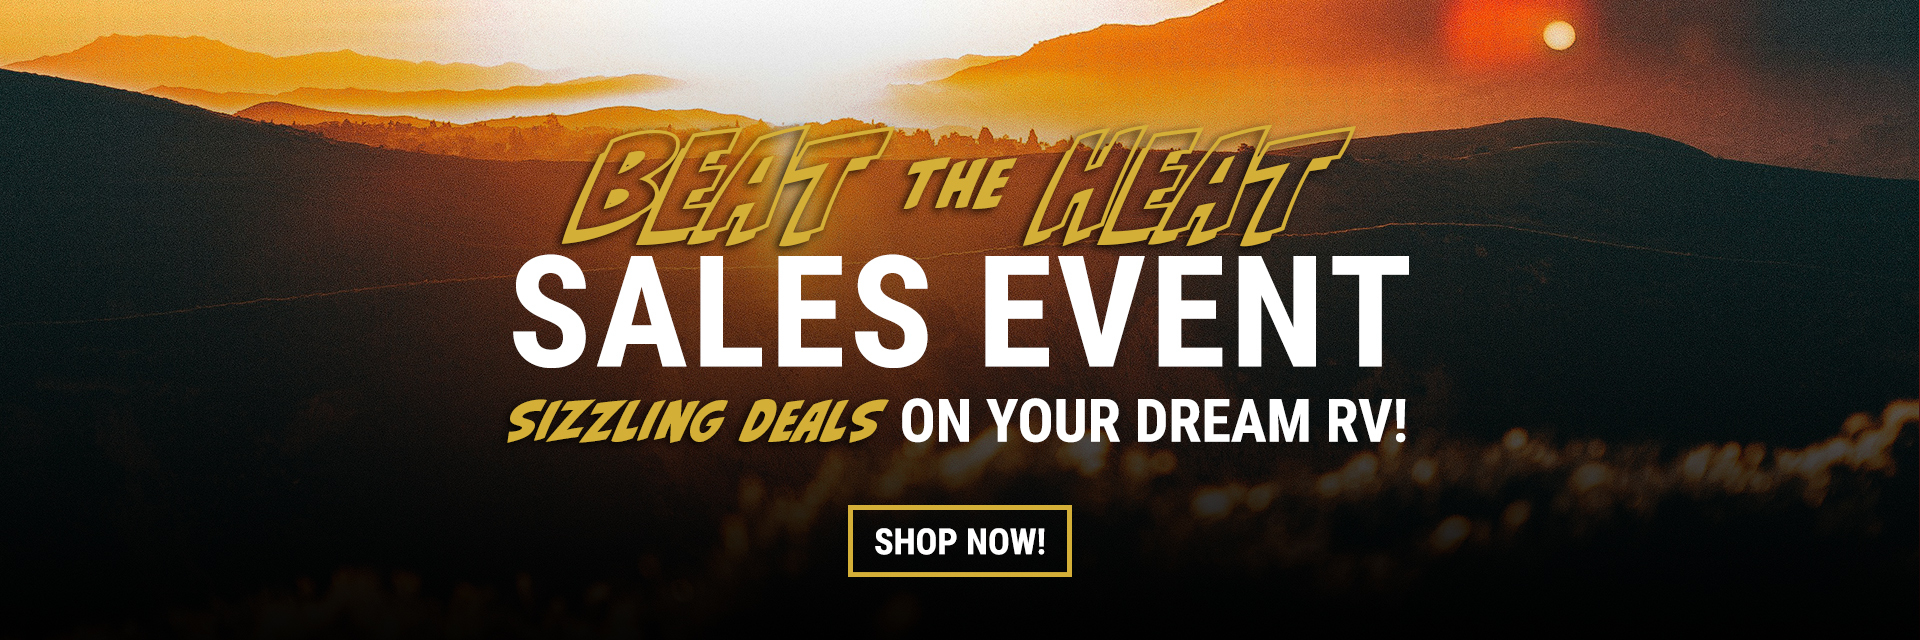 Beat the heat sales event, sizzling sales on your dream RV!